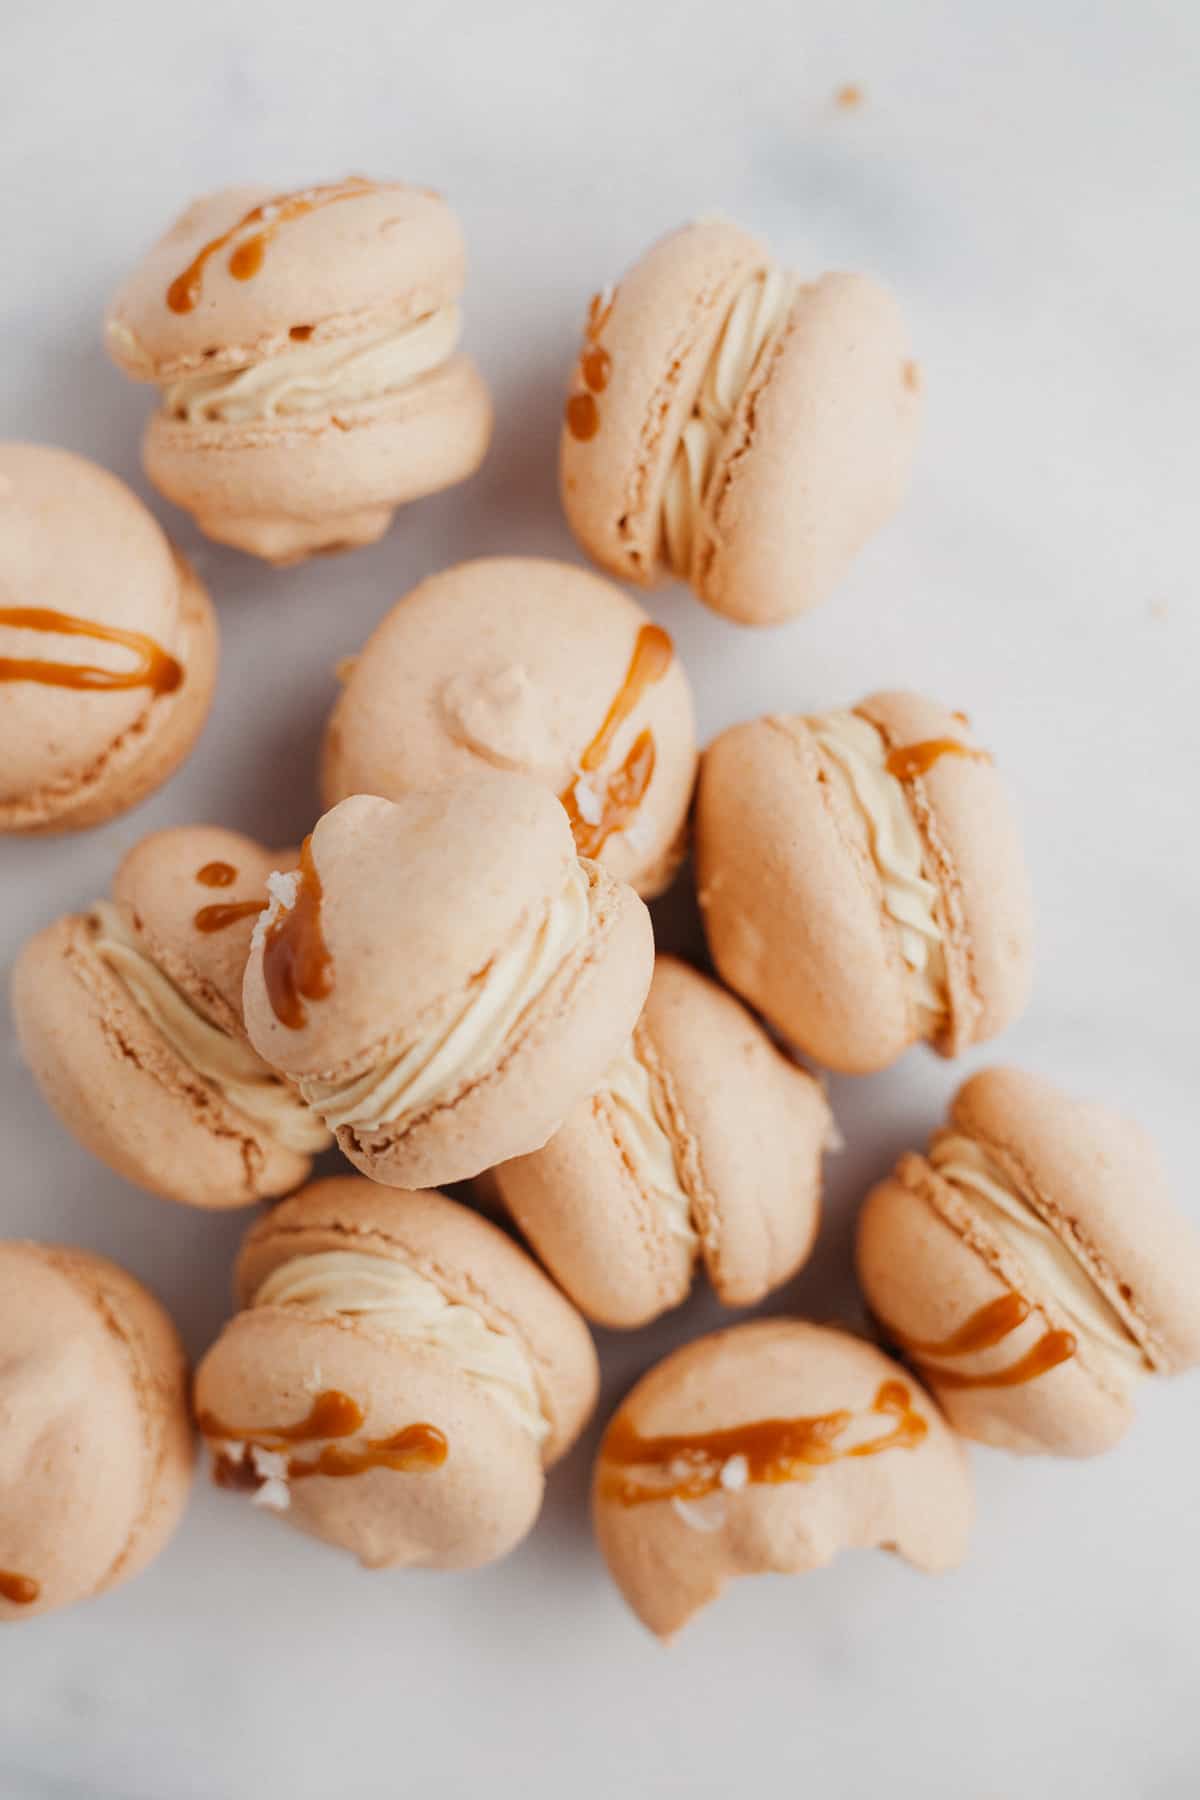 about 10 salted caramel macarons on their side on a marble counter